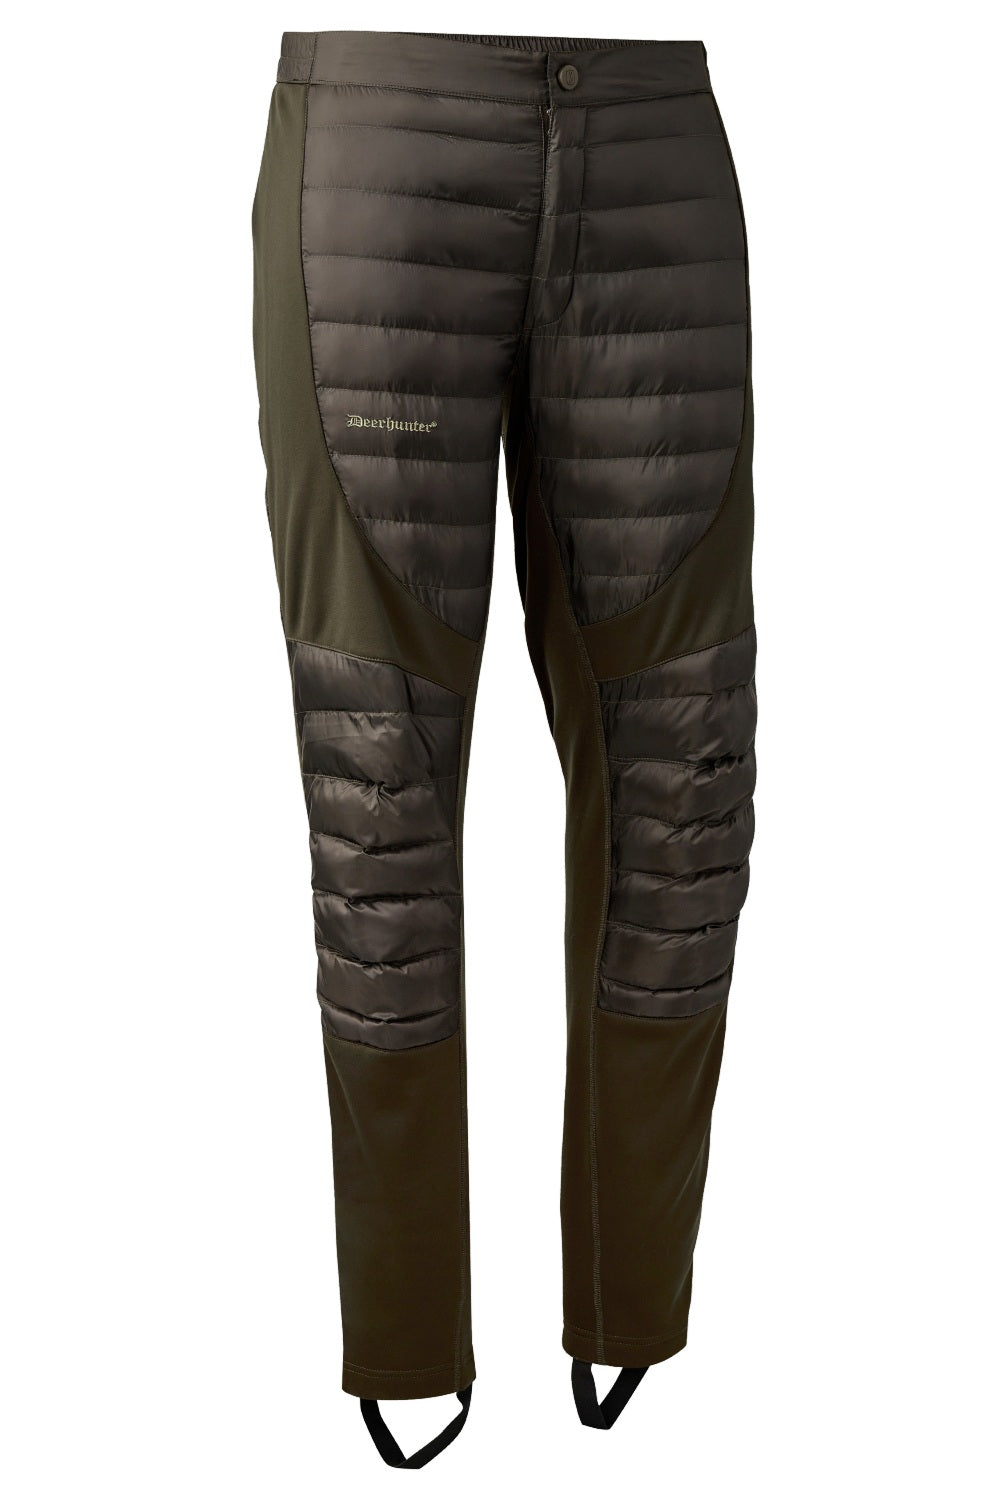 Deerhunter Excape Quilted Trousers in Art Green 